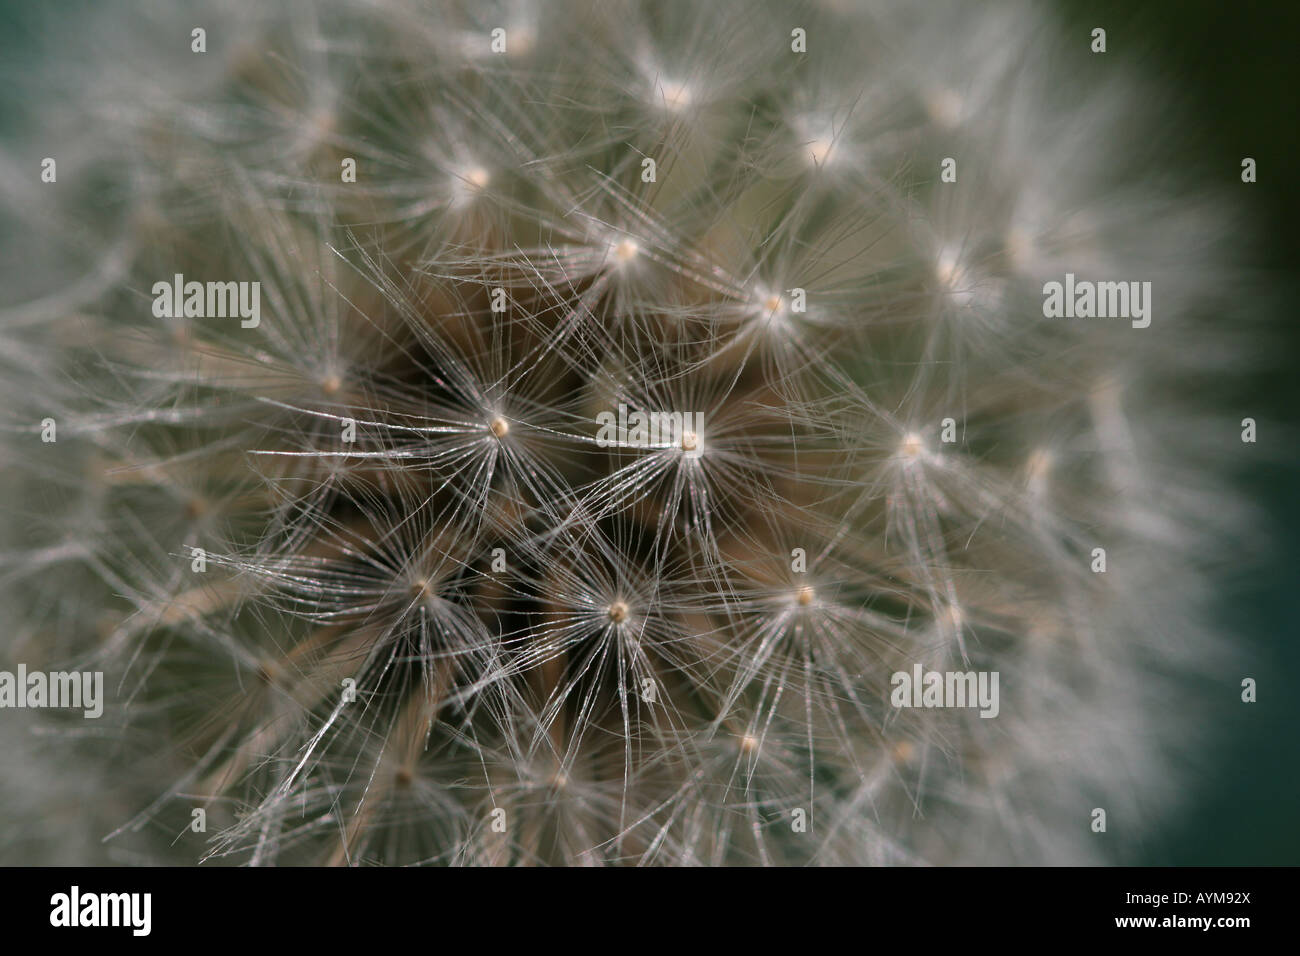 Very close up detail of dandelion seed head showing individual seeds Stock Photo